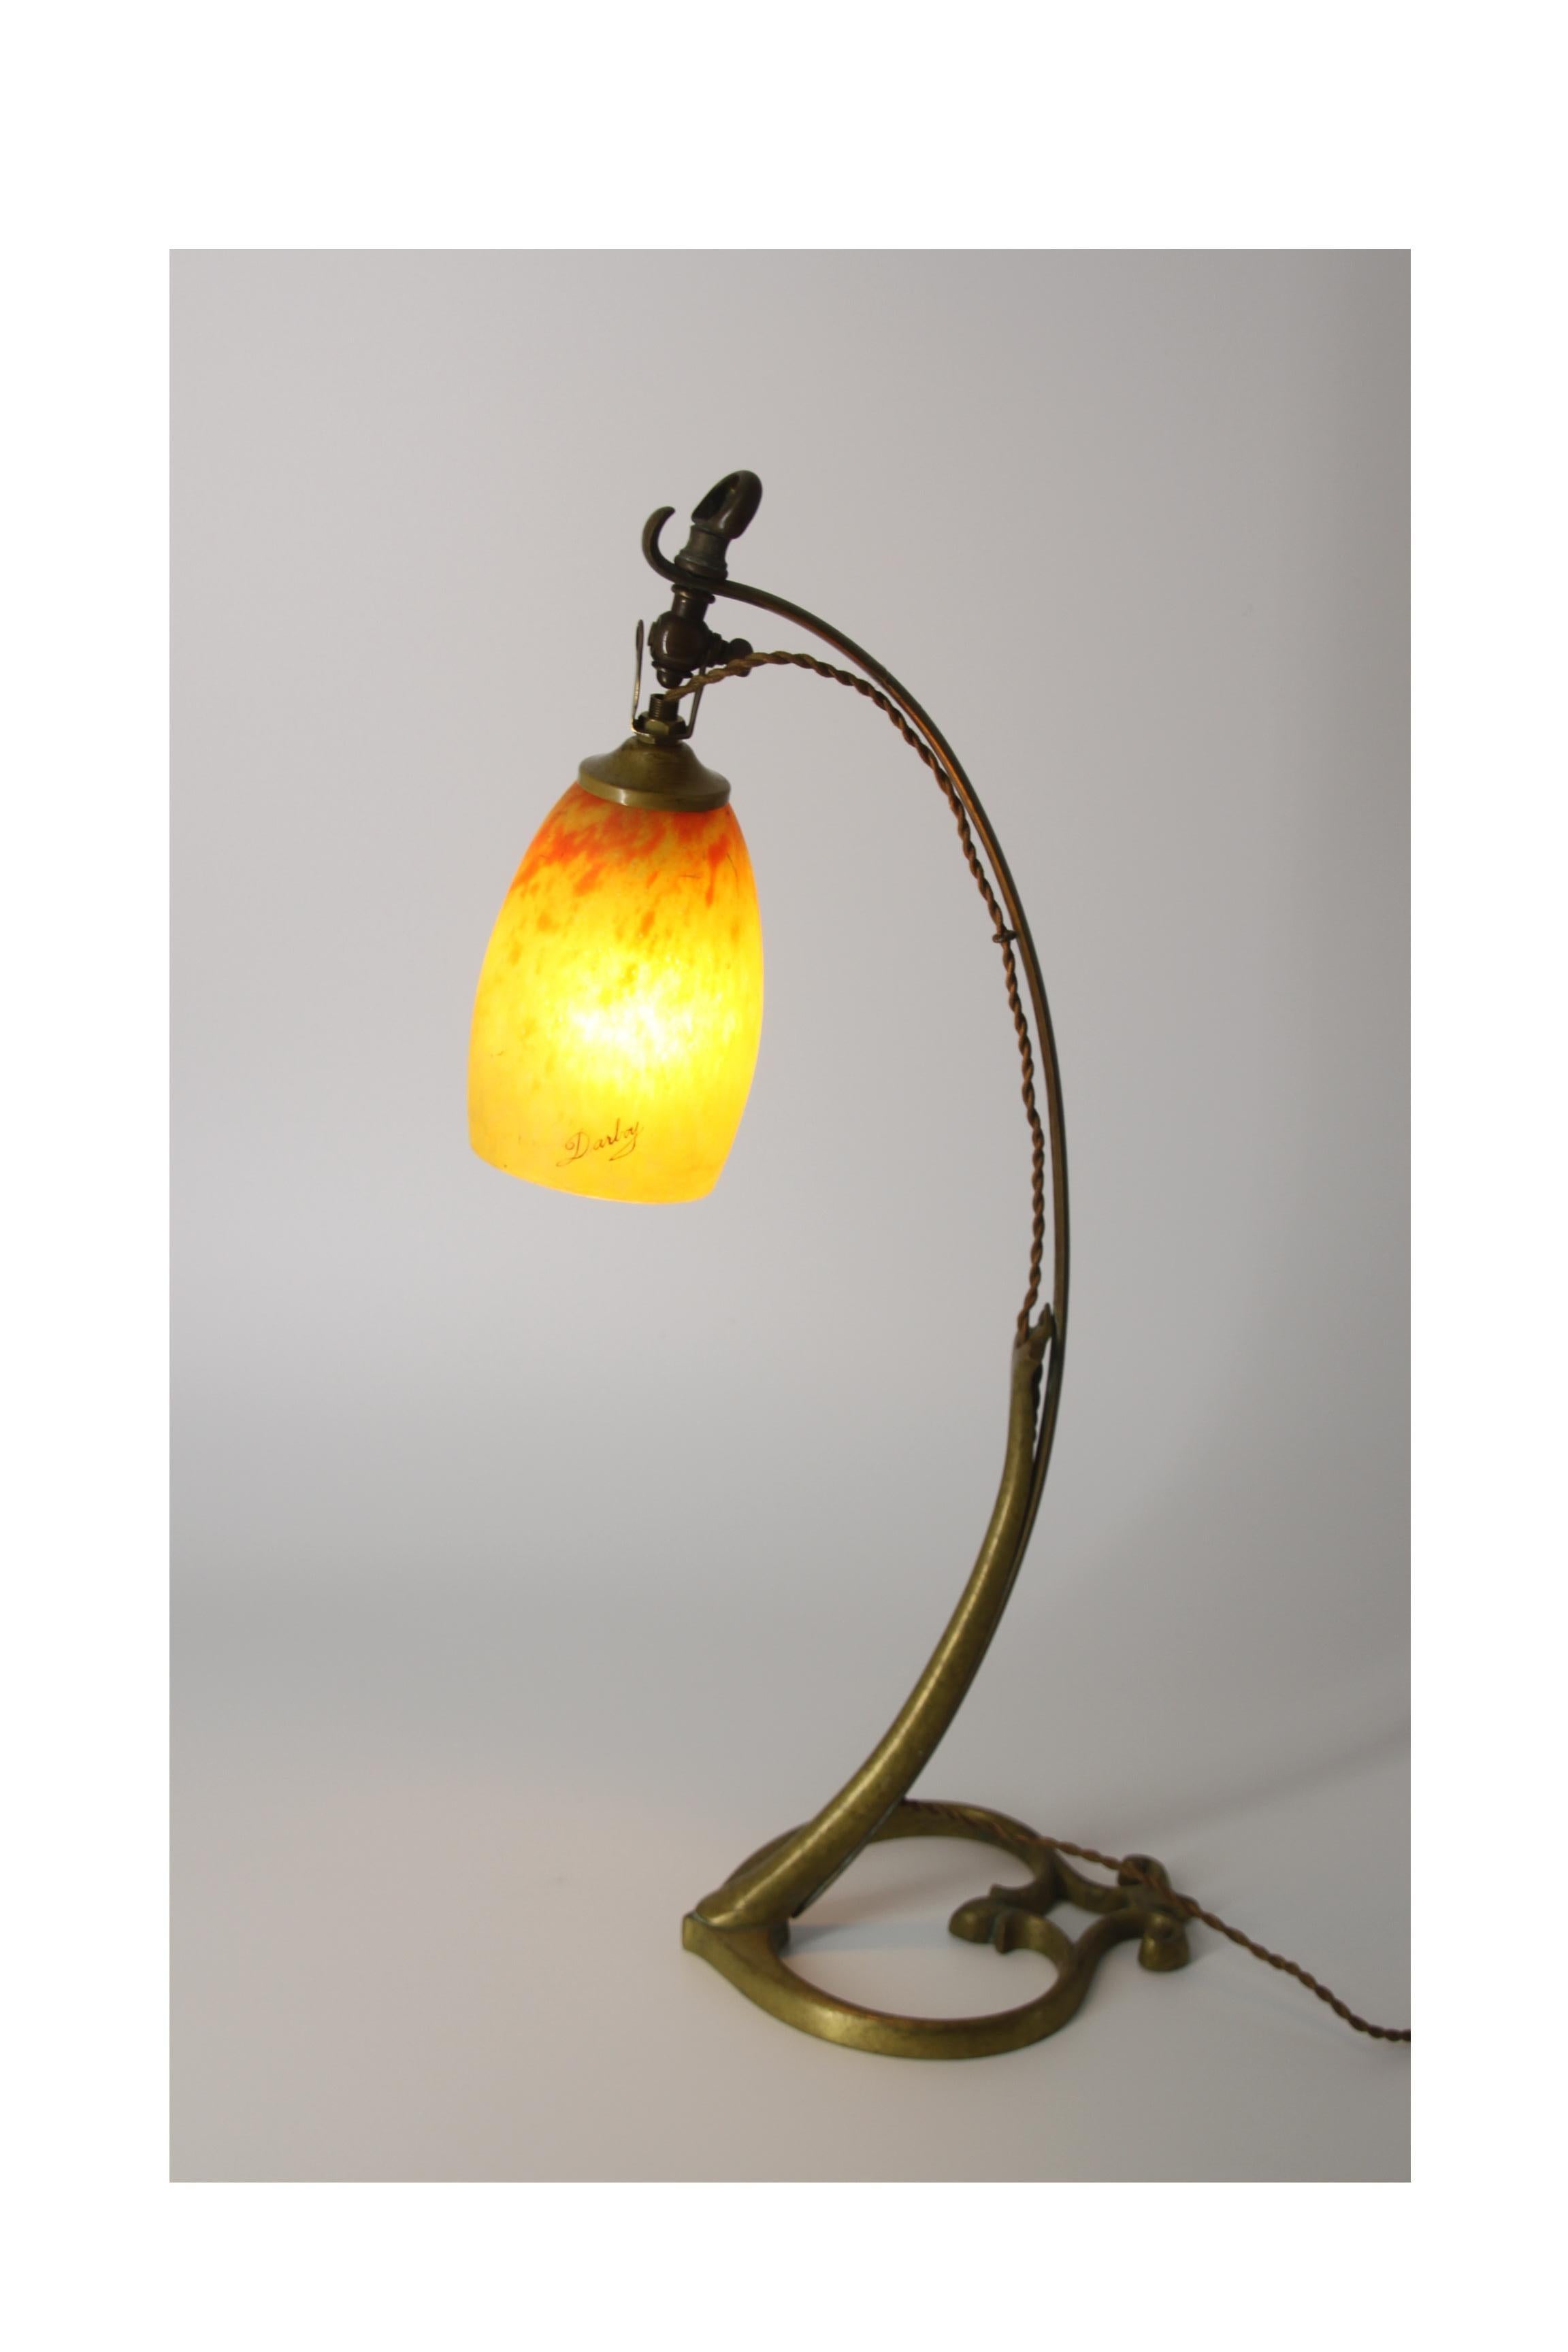 Late 19th Century Muller Frères “Darboy” Set of 2 Bronze and Glass Table Lamps, Art Nouveau